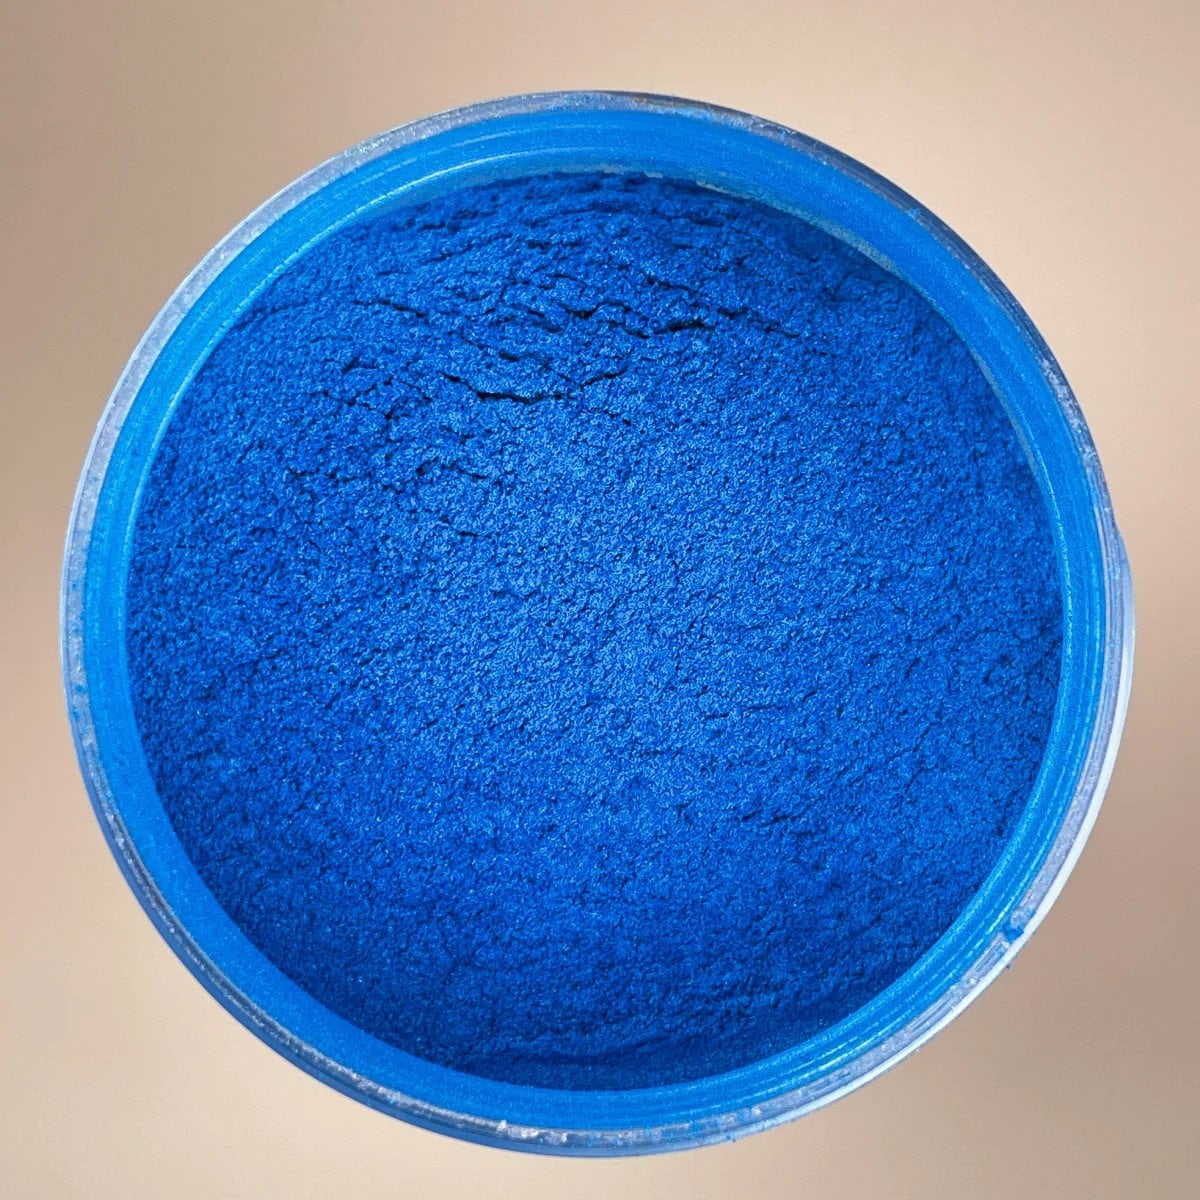 Mica Powder - Rainbow Blue - Mica Powder For Epoxy Resin, Candle Making, Soap Making, Makeup, Nail Art and Much More - TMResinsupplies